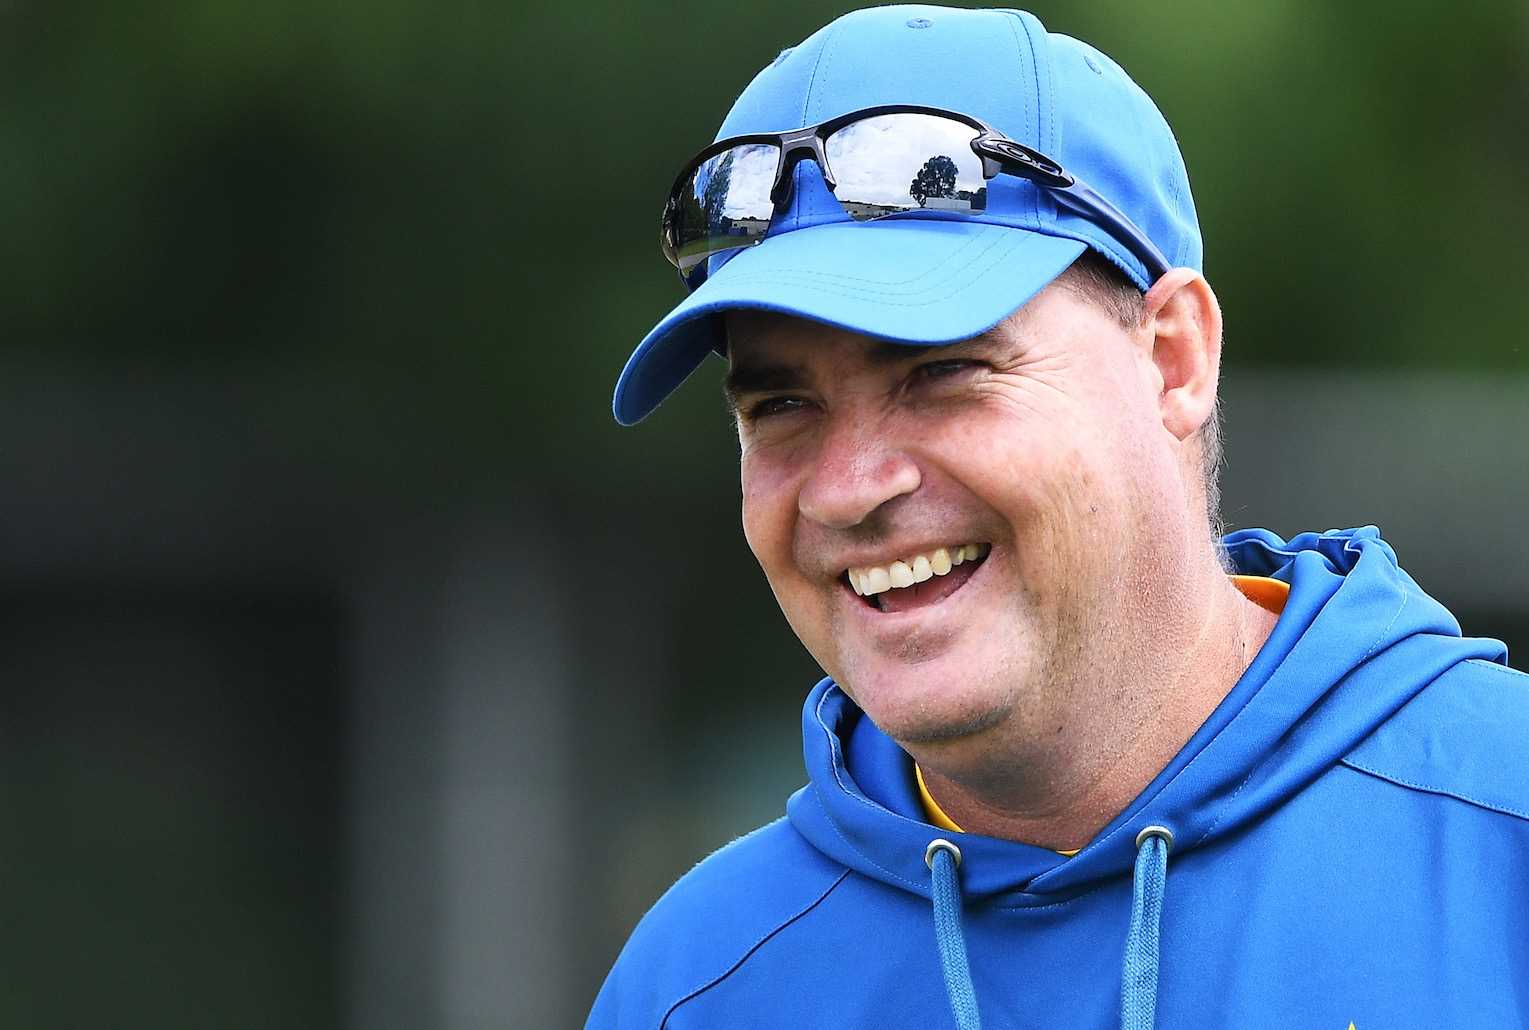 You’d be naive to say that ball-tampering wasn't happening before Sandpaper Gate, claims Mickey Arthur 